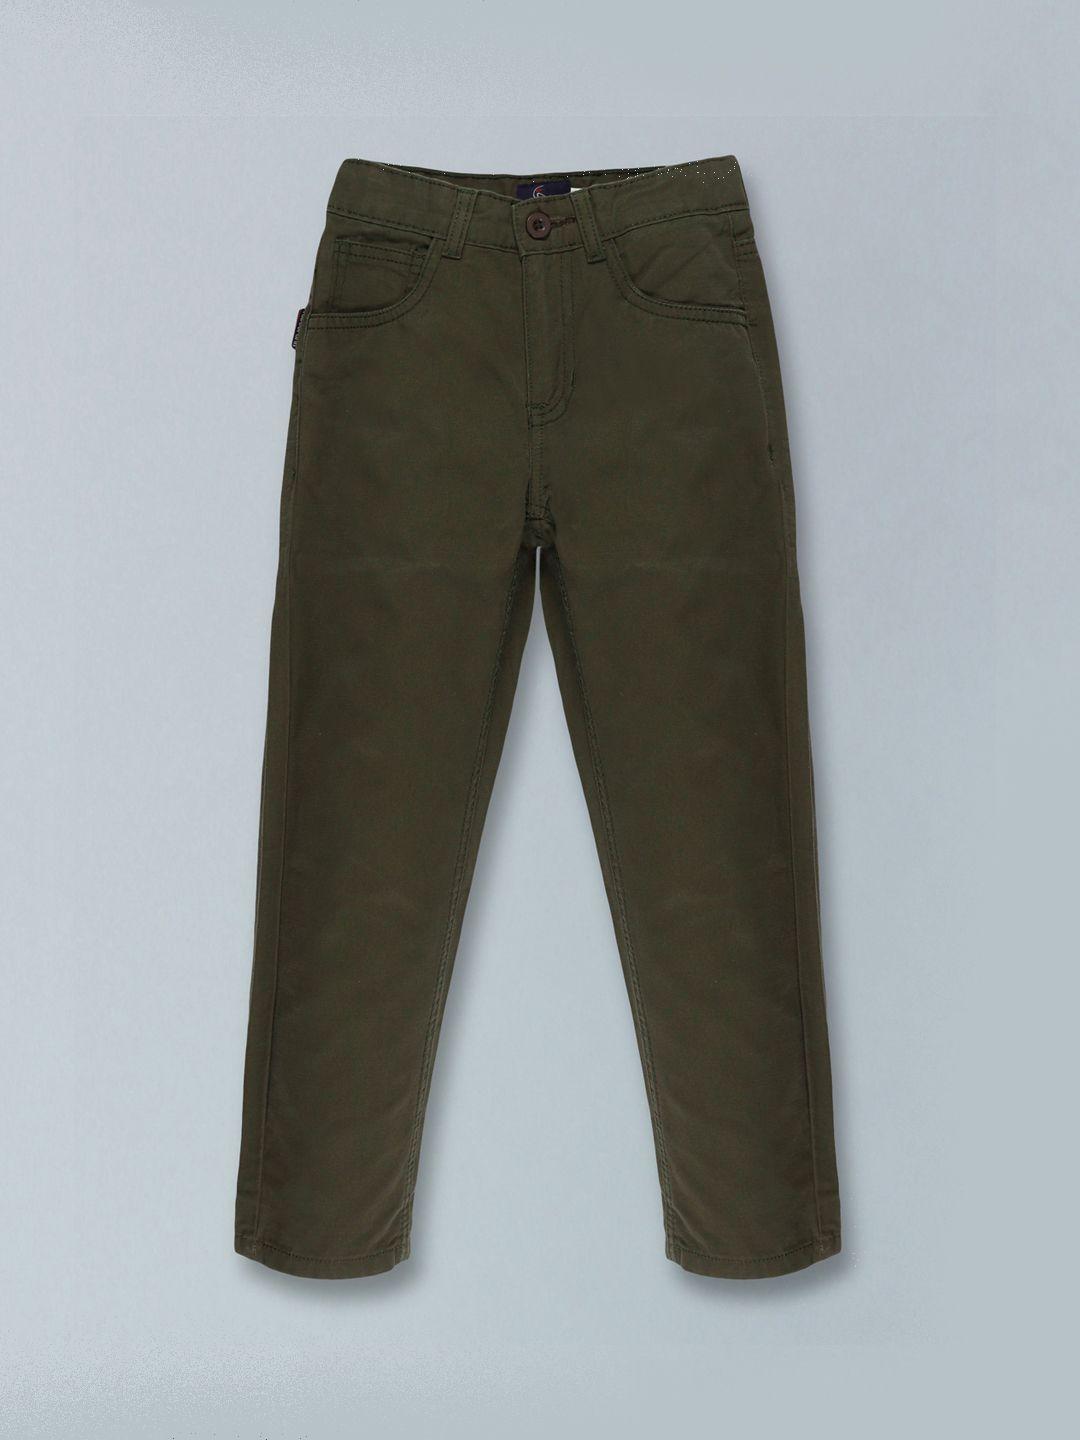 kiddopanti boys olive green solid casual trousers